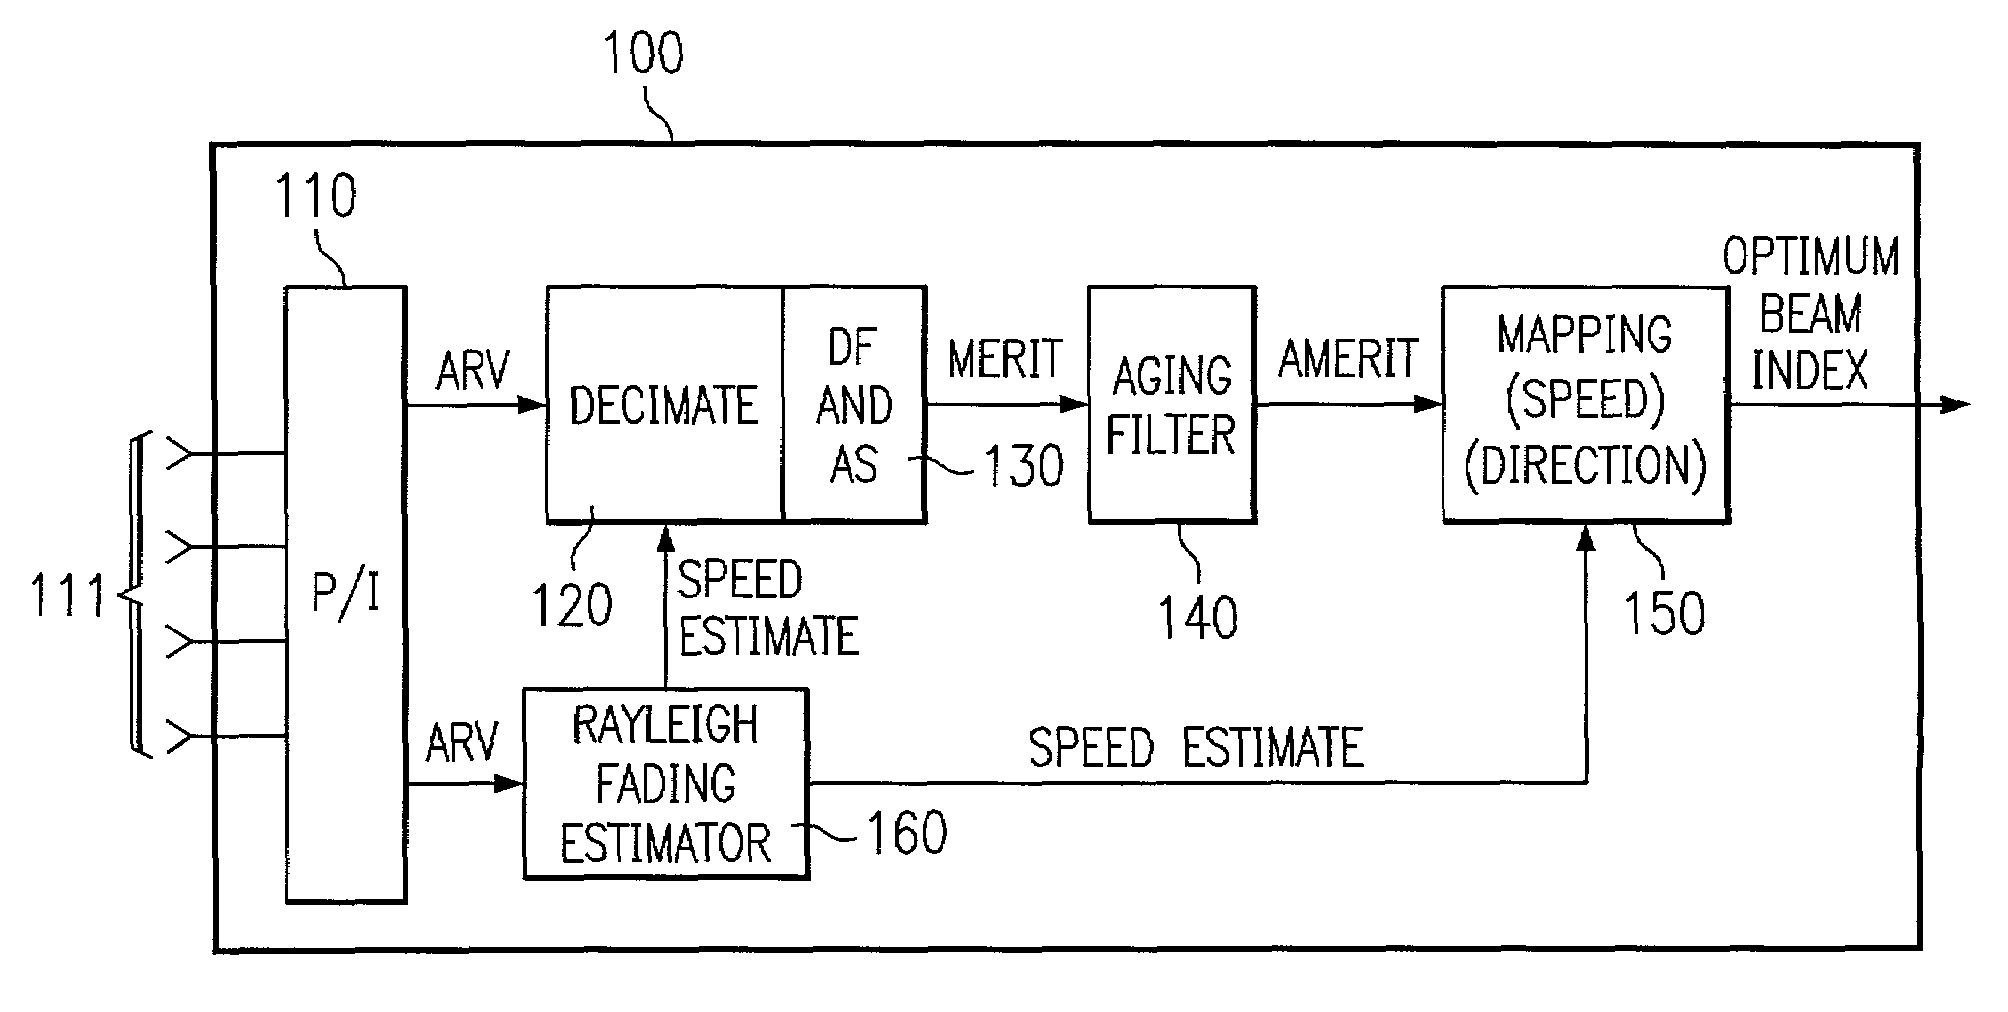 System and method for selecting optimized beam configuration